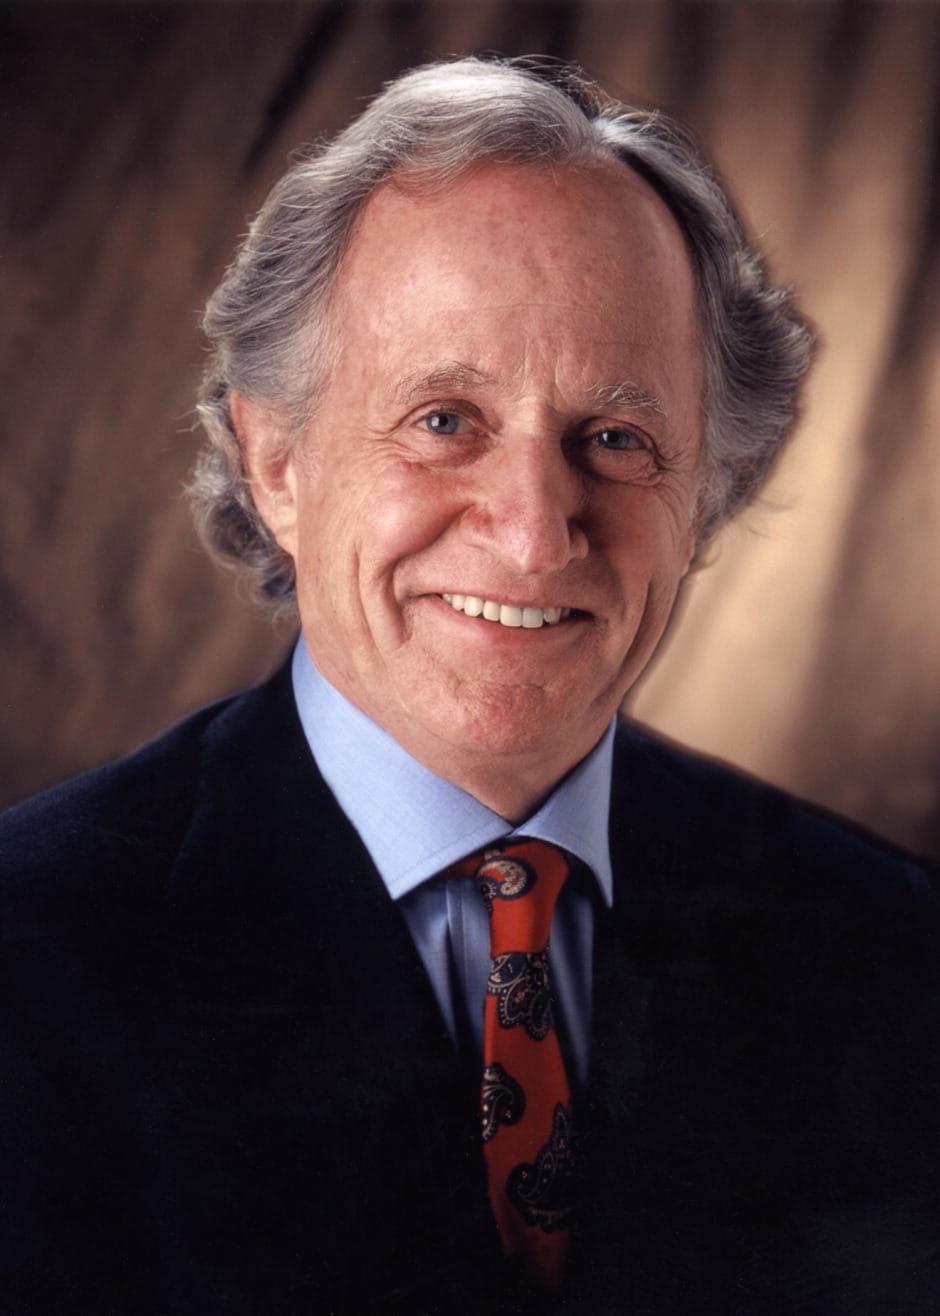 2007 Dr. Mario Capecchi receives the Nobel Prize in Physiology or Medicine for his discoveries in gene targeting.